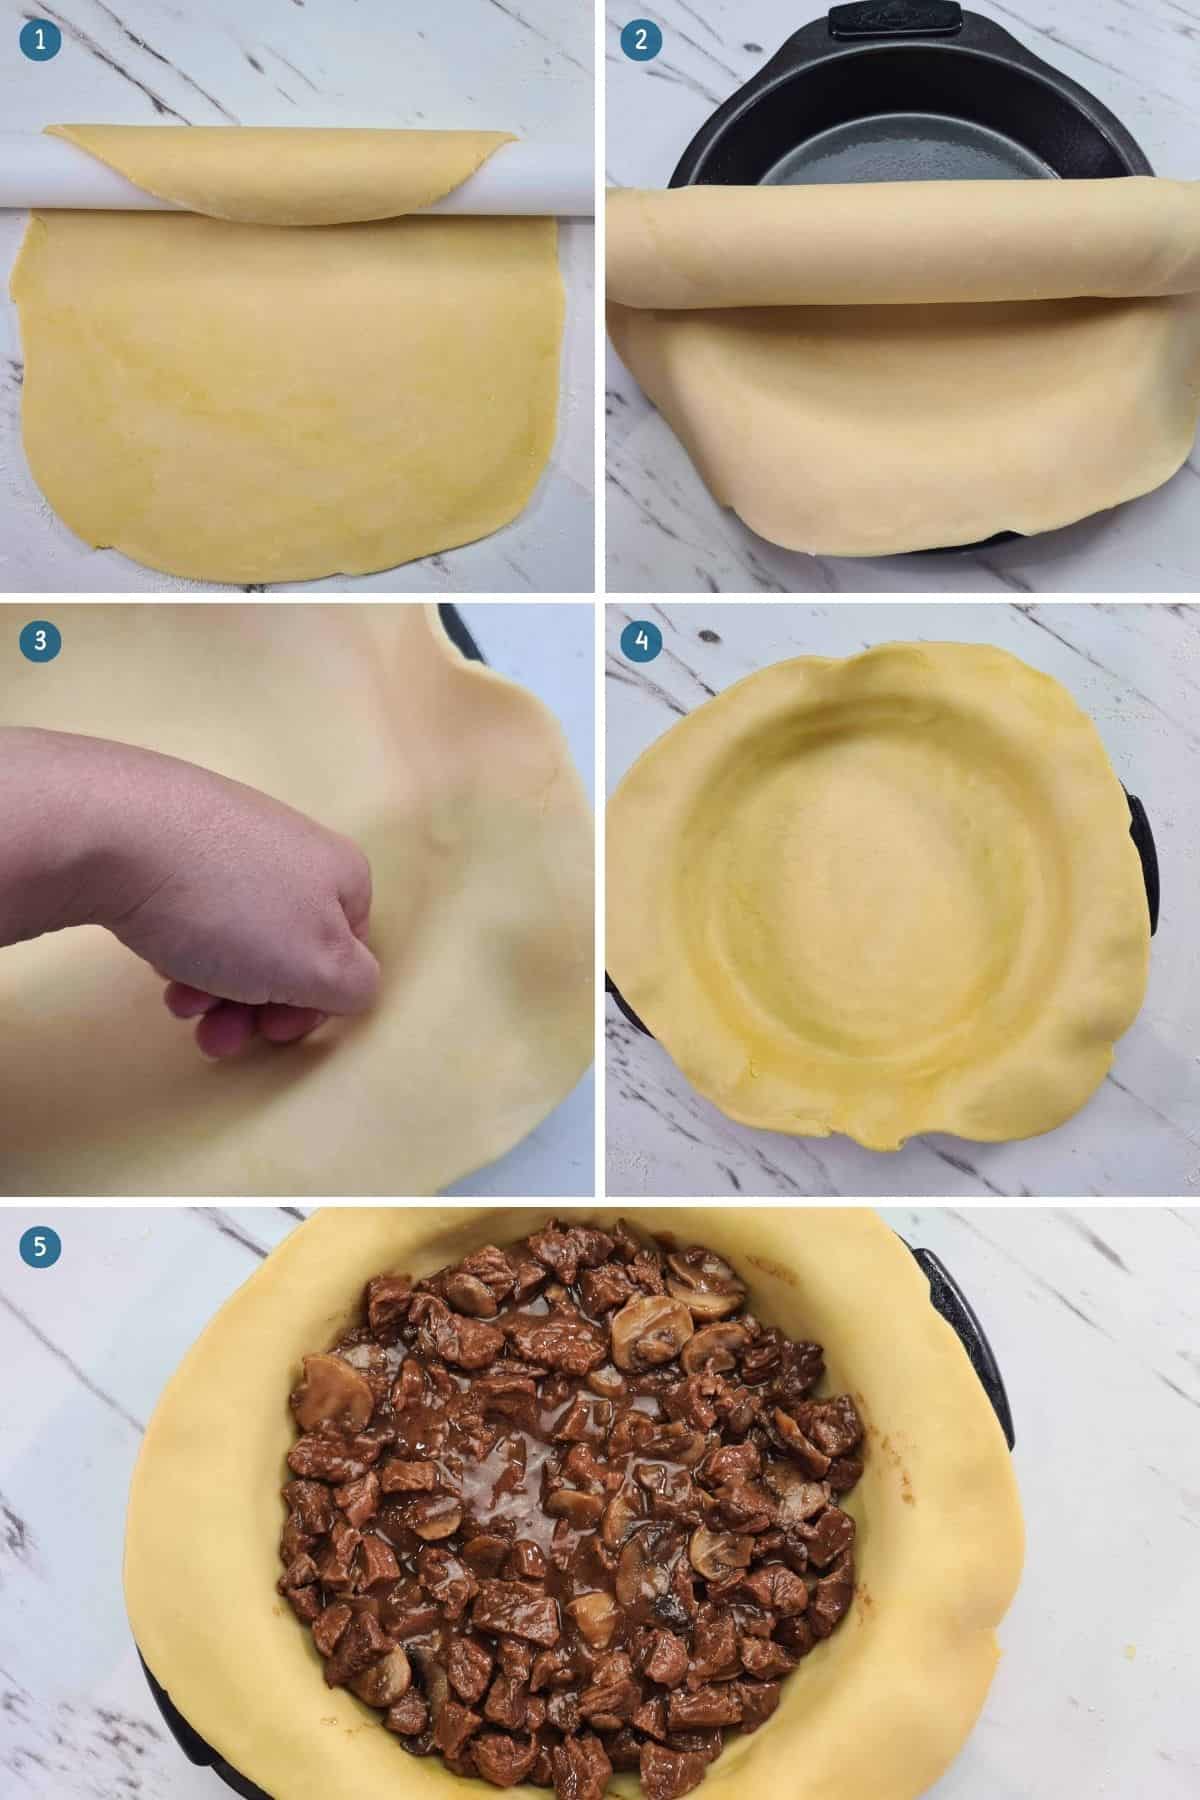 adding-the-base-layer-of-pastry-and-the-filling-for-chunky-steak-and-mushroom-pie